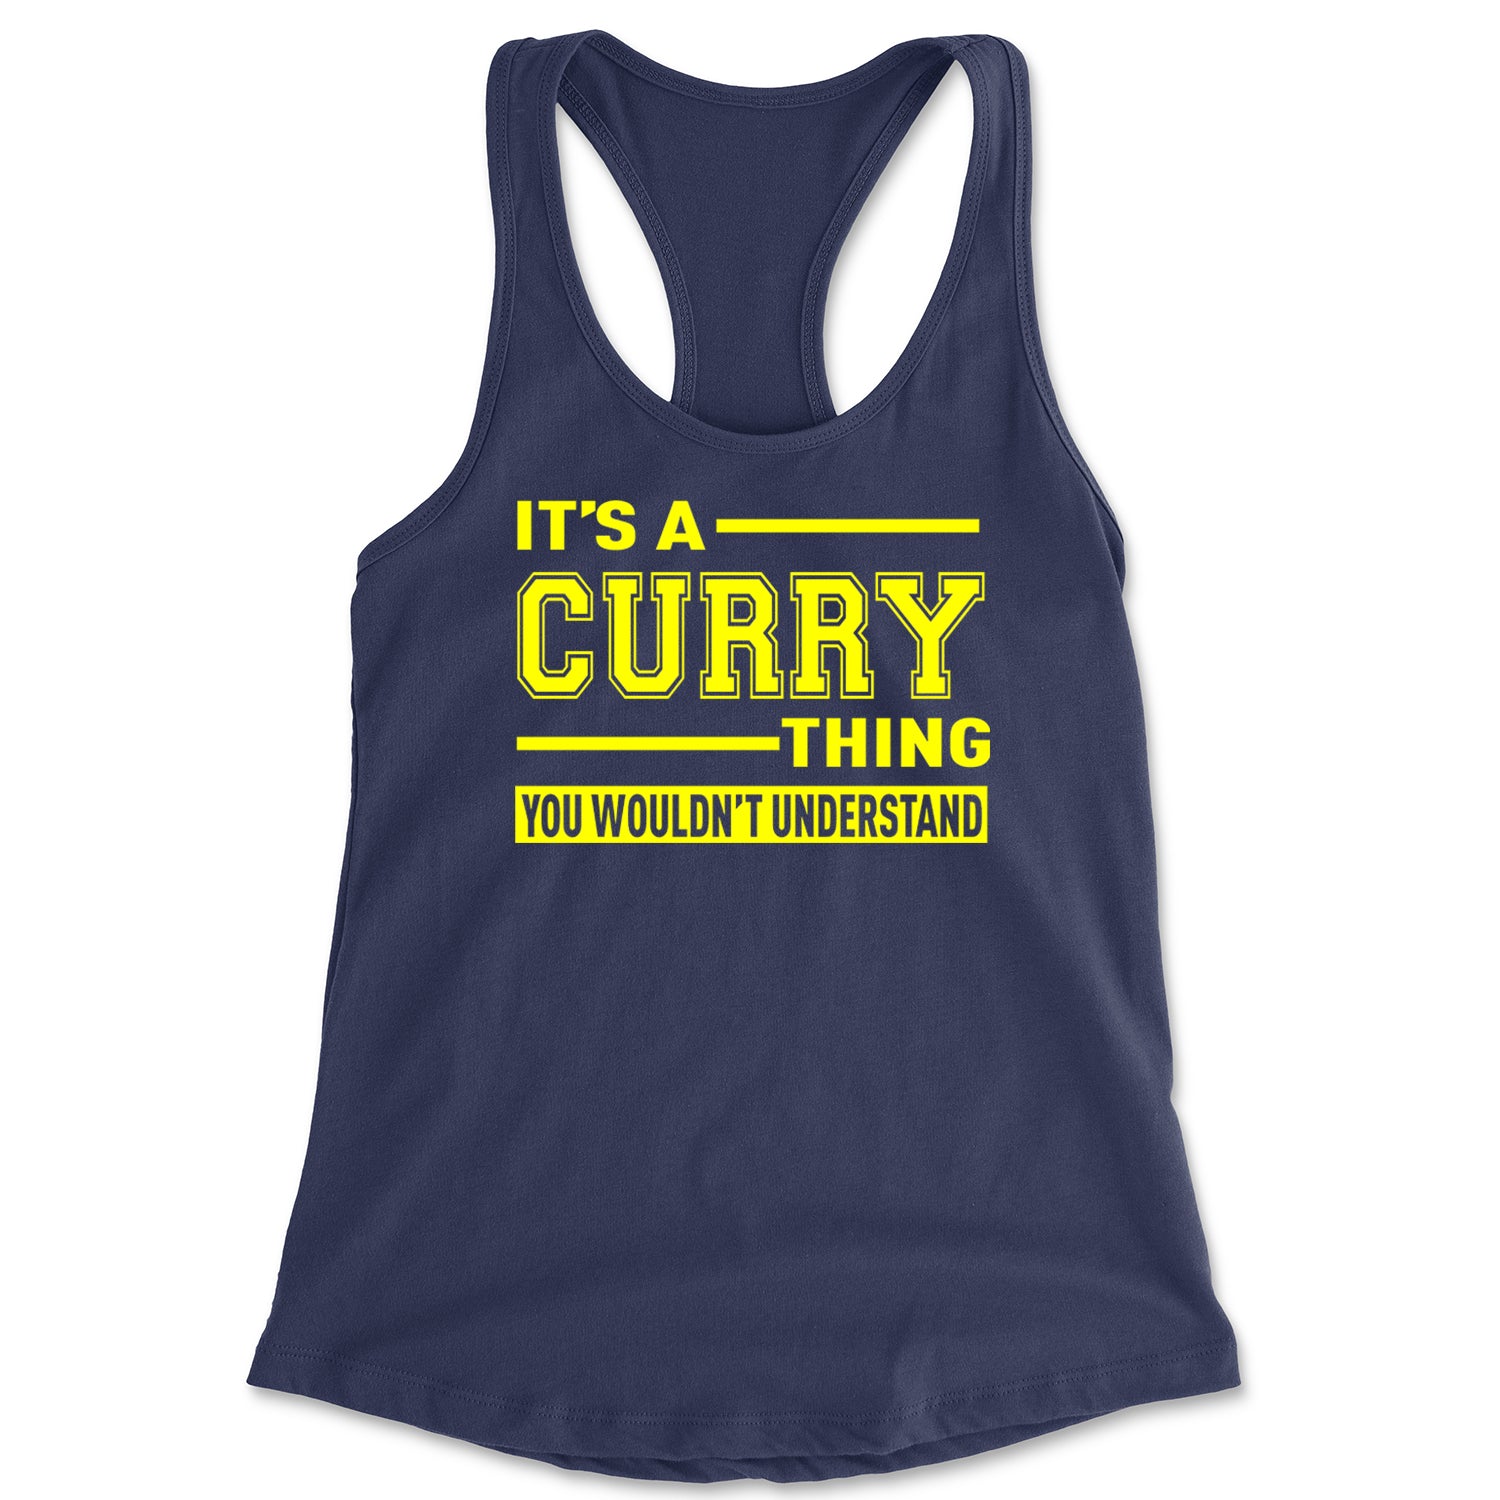 It's A Curry Thing, You Wouldn't Understand Basketball Racerback Tank Top for Women